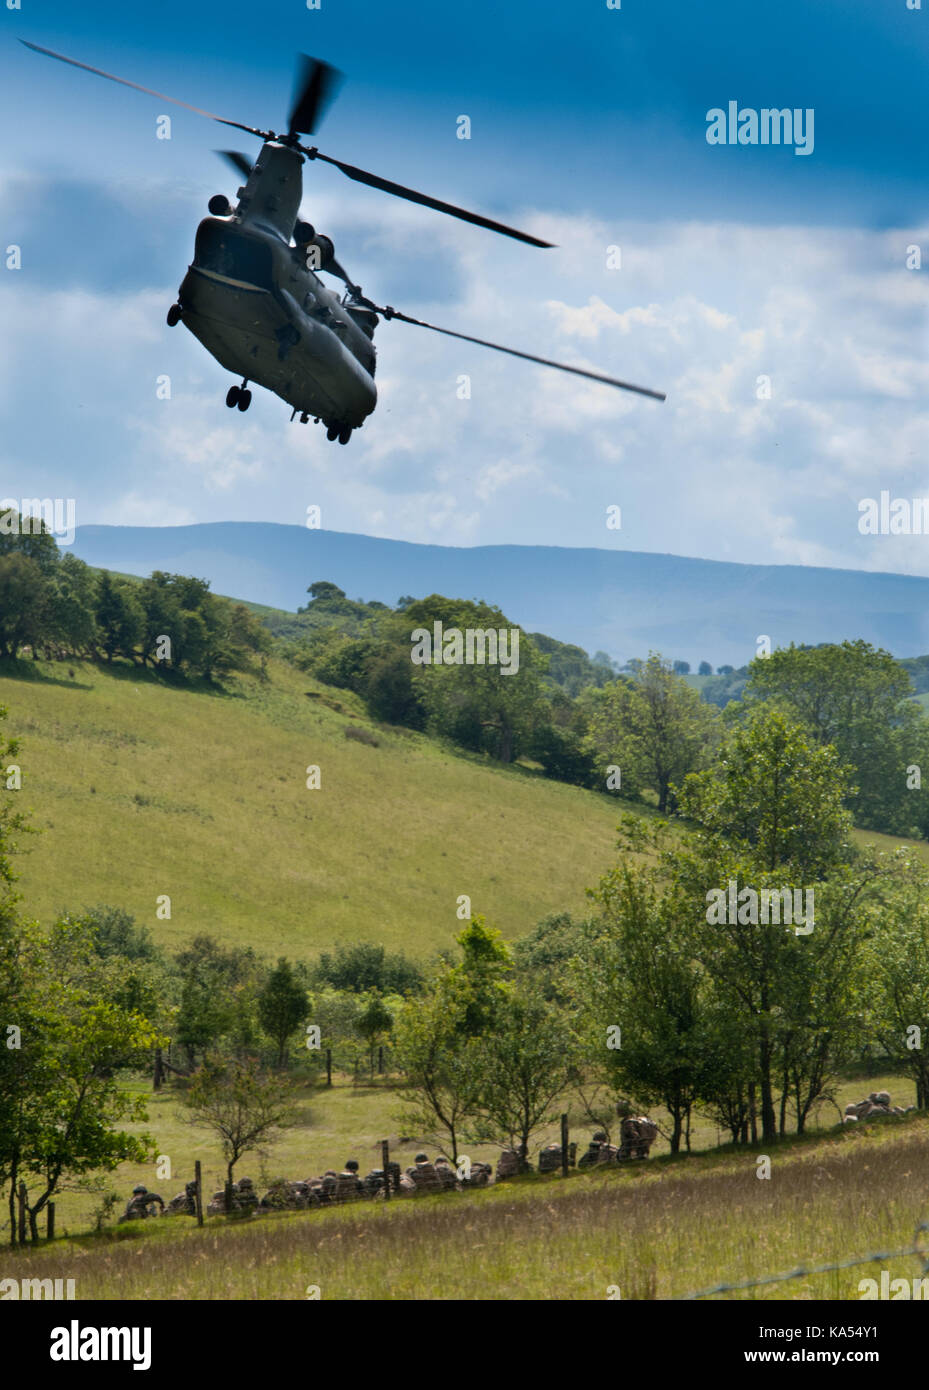 A CH47 Chinook helicopter of the RAF over flies British Army soldiers on the Sennybridge military training area in Wales Stock Photo